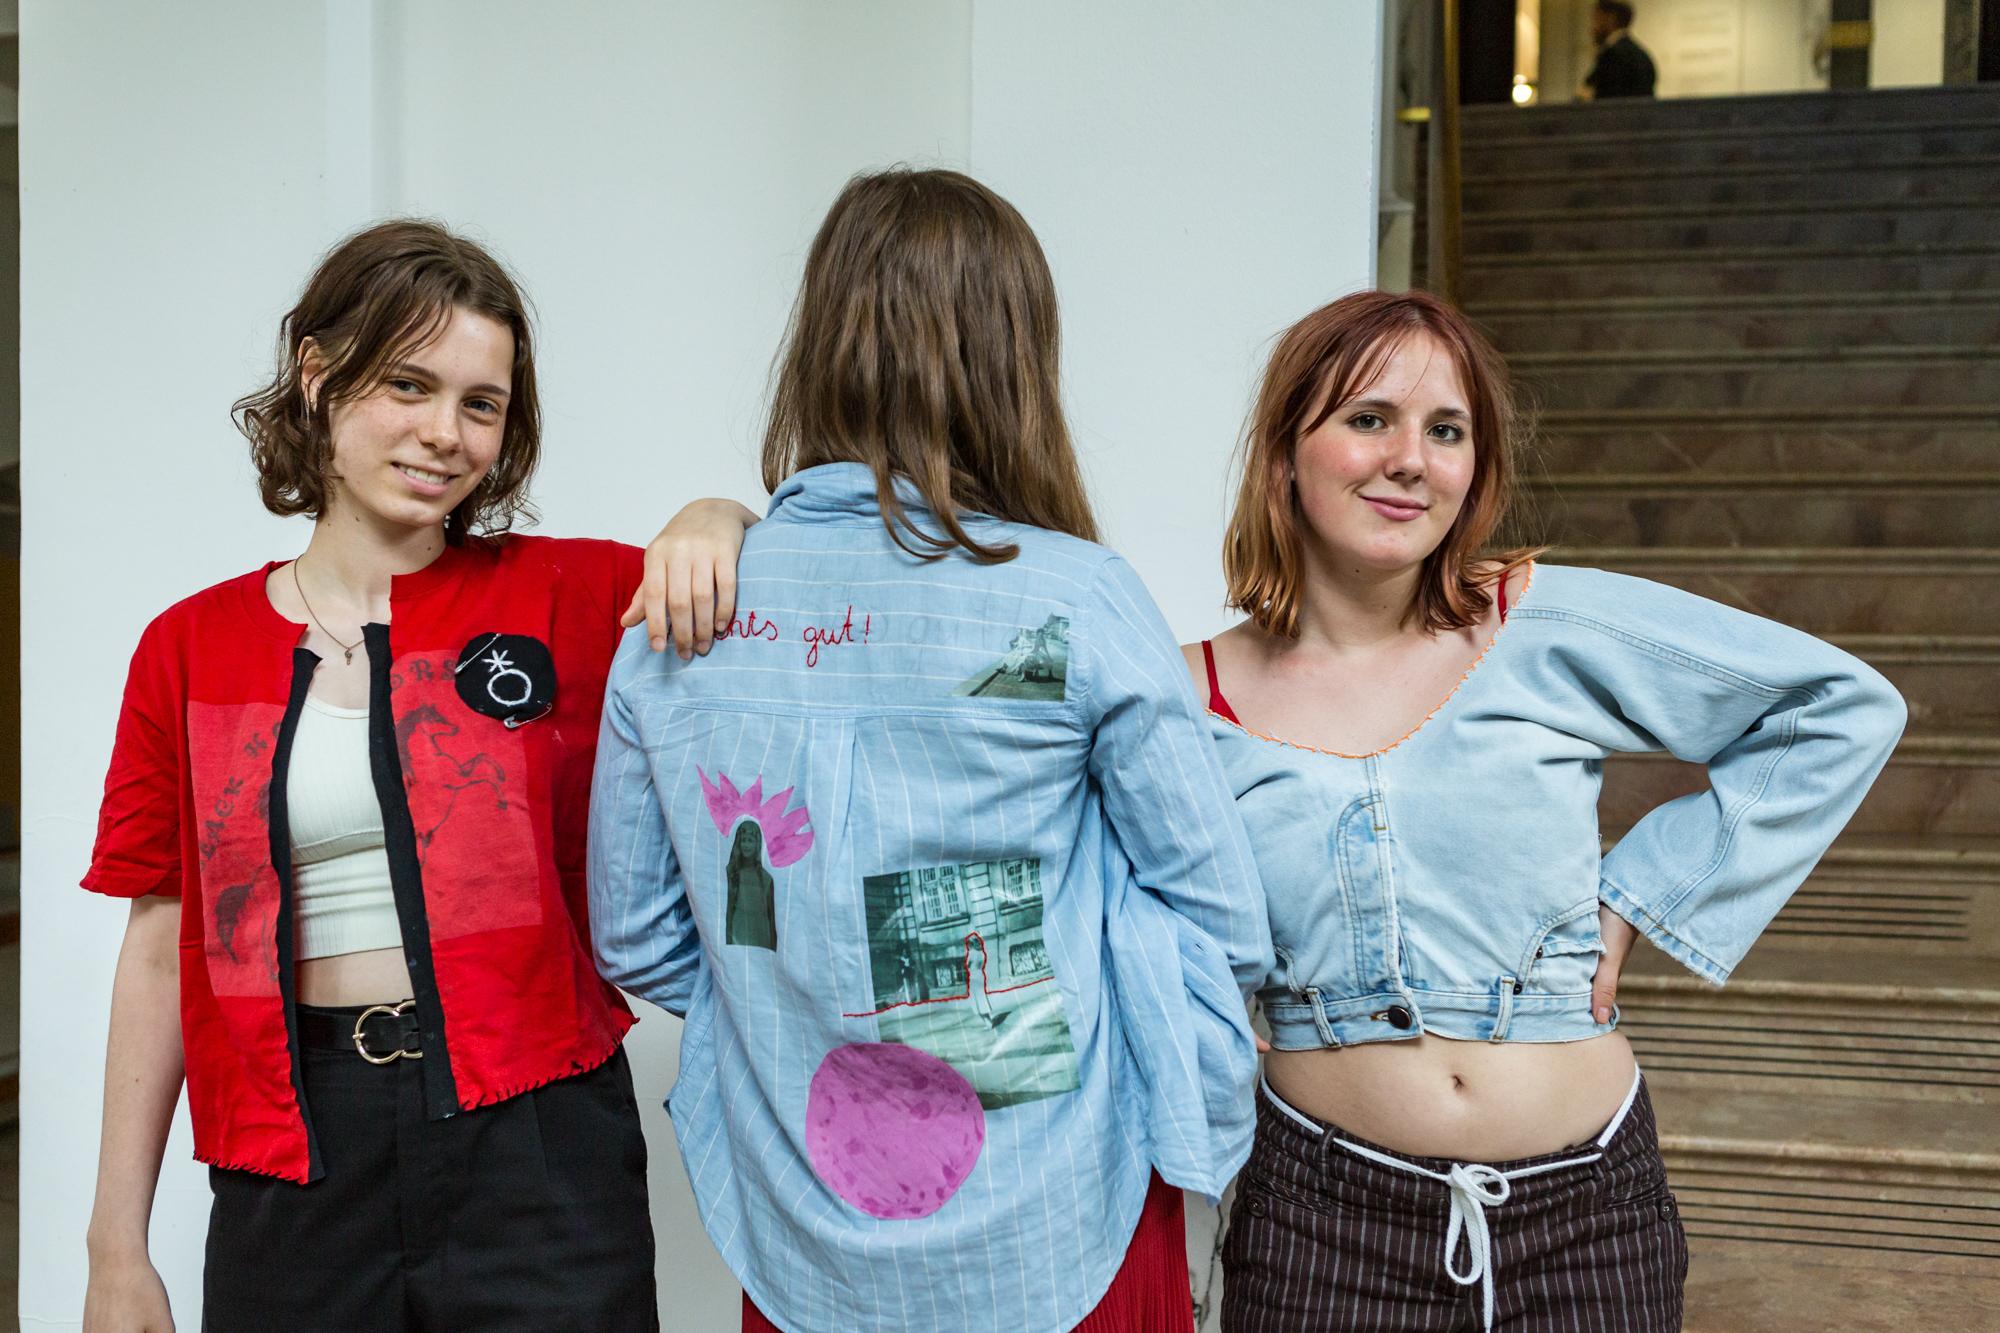 Three young, female-read people stand in a row and present their embroidered clothes. The person in the middle turns her back to the camera.